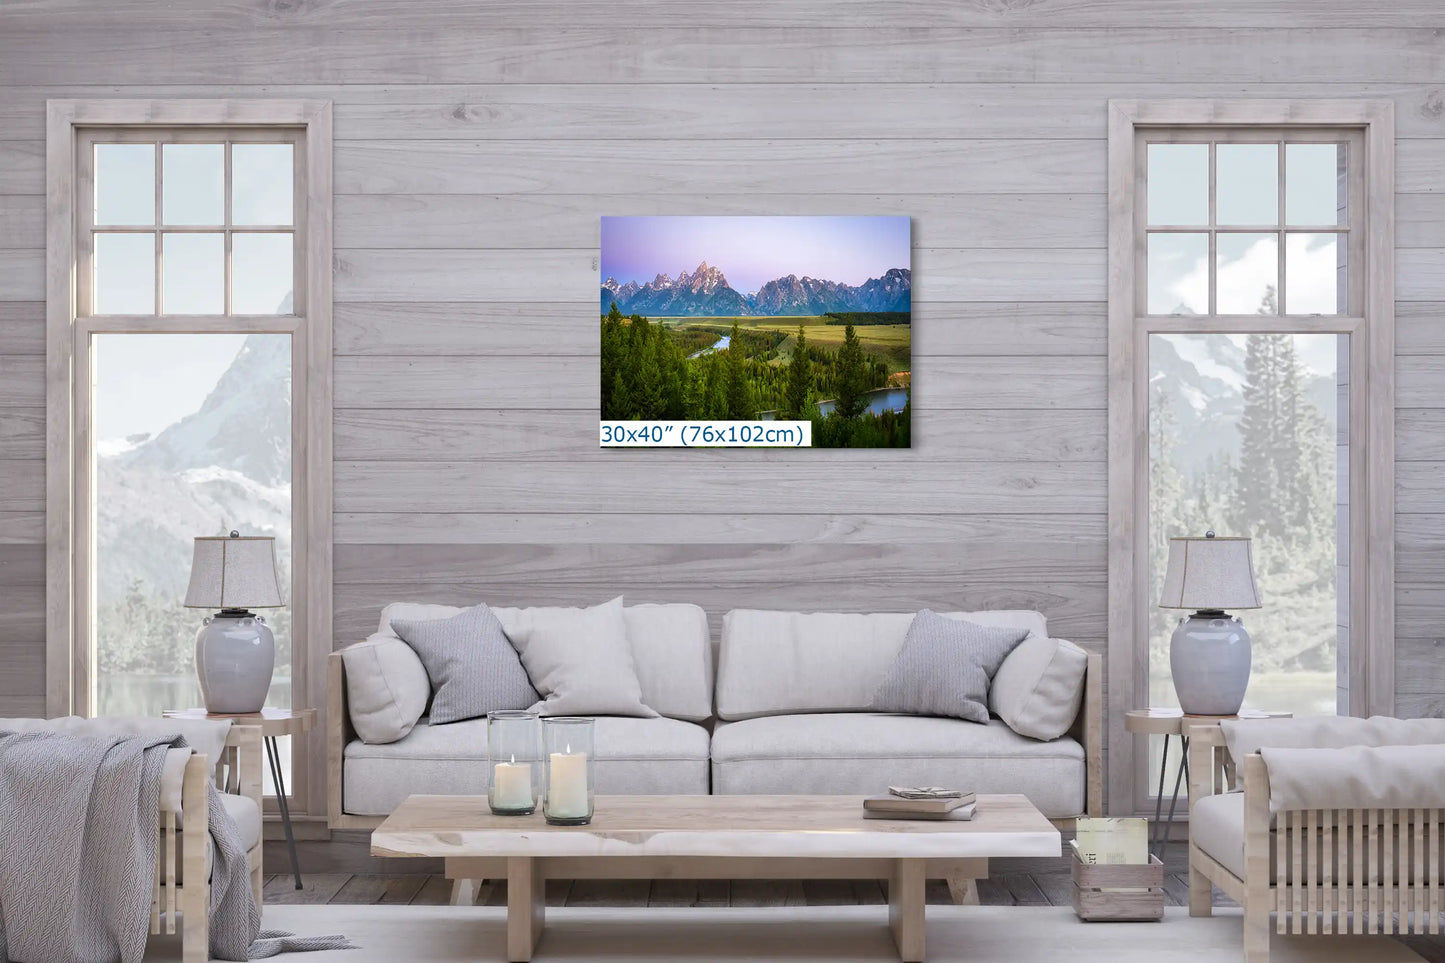 A large 30x40 inch canvas print of Grand Teton Mountains during a purple sunrise in a living room setting above a sofa.